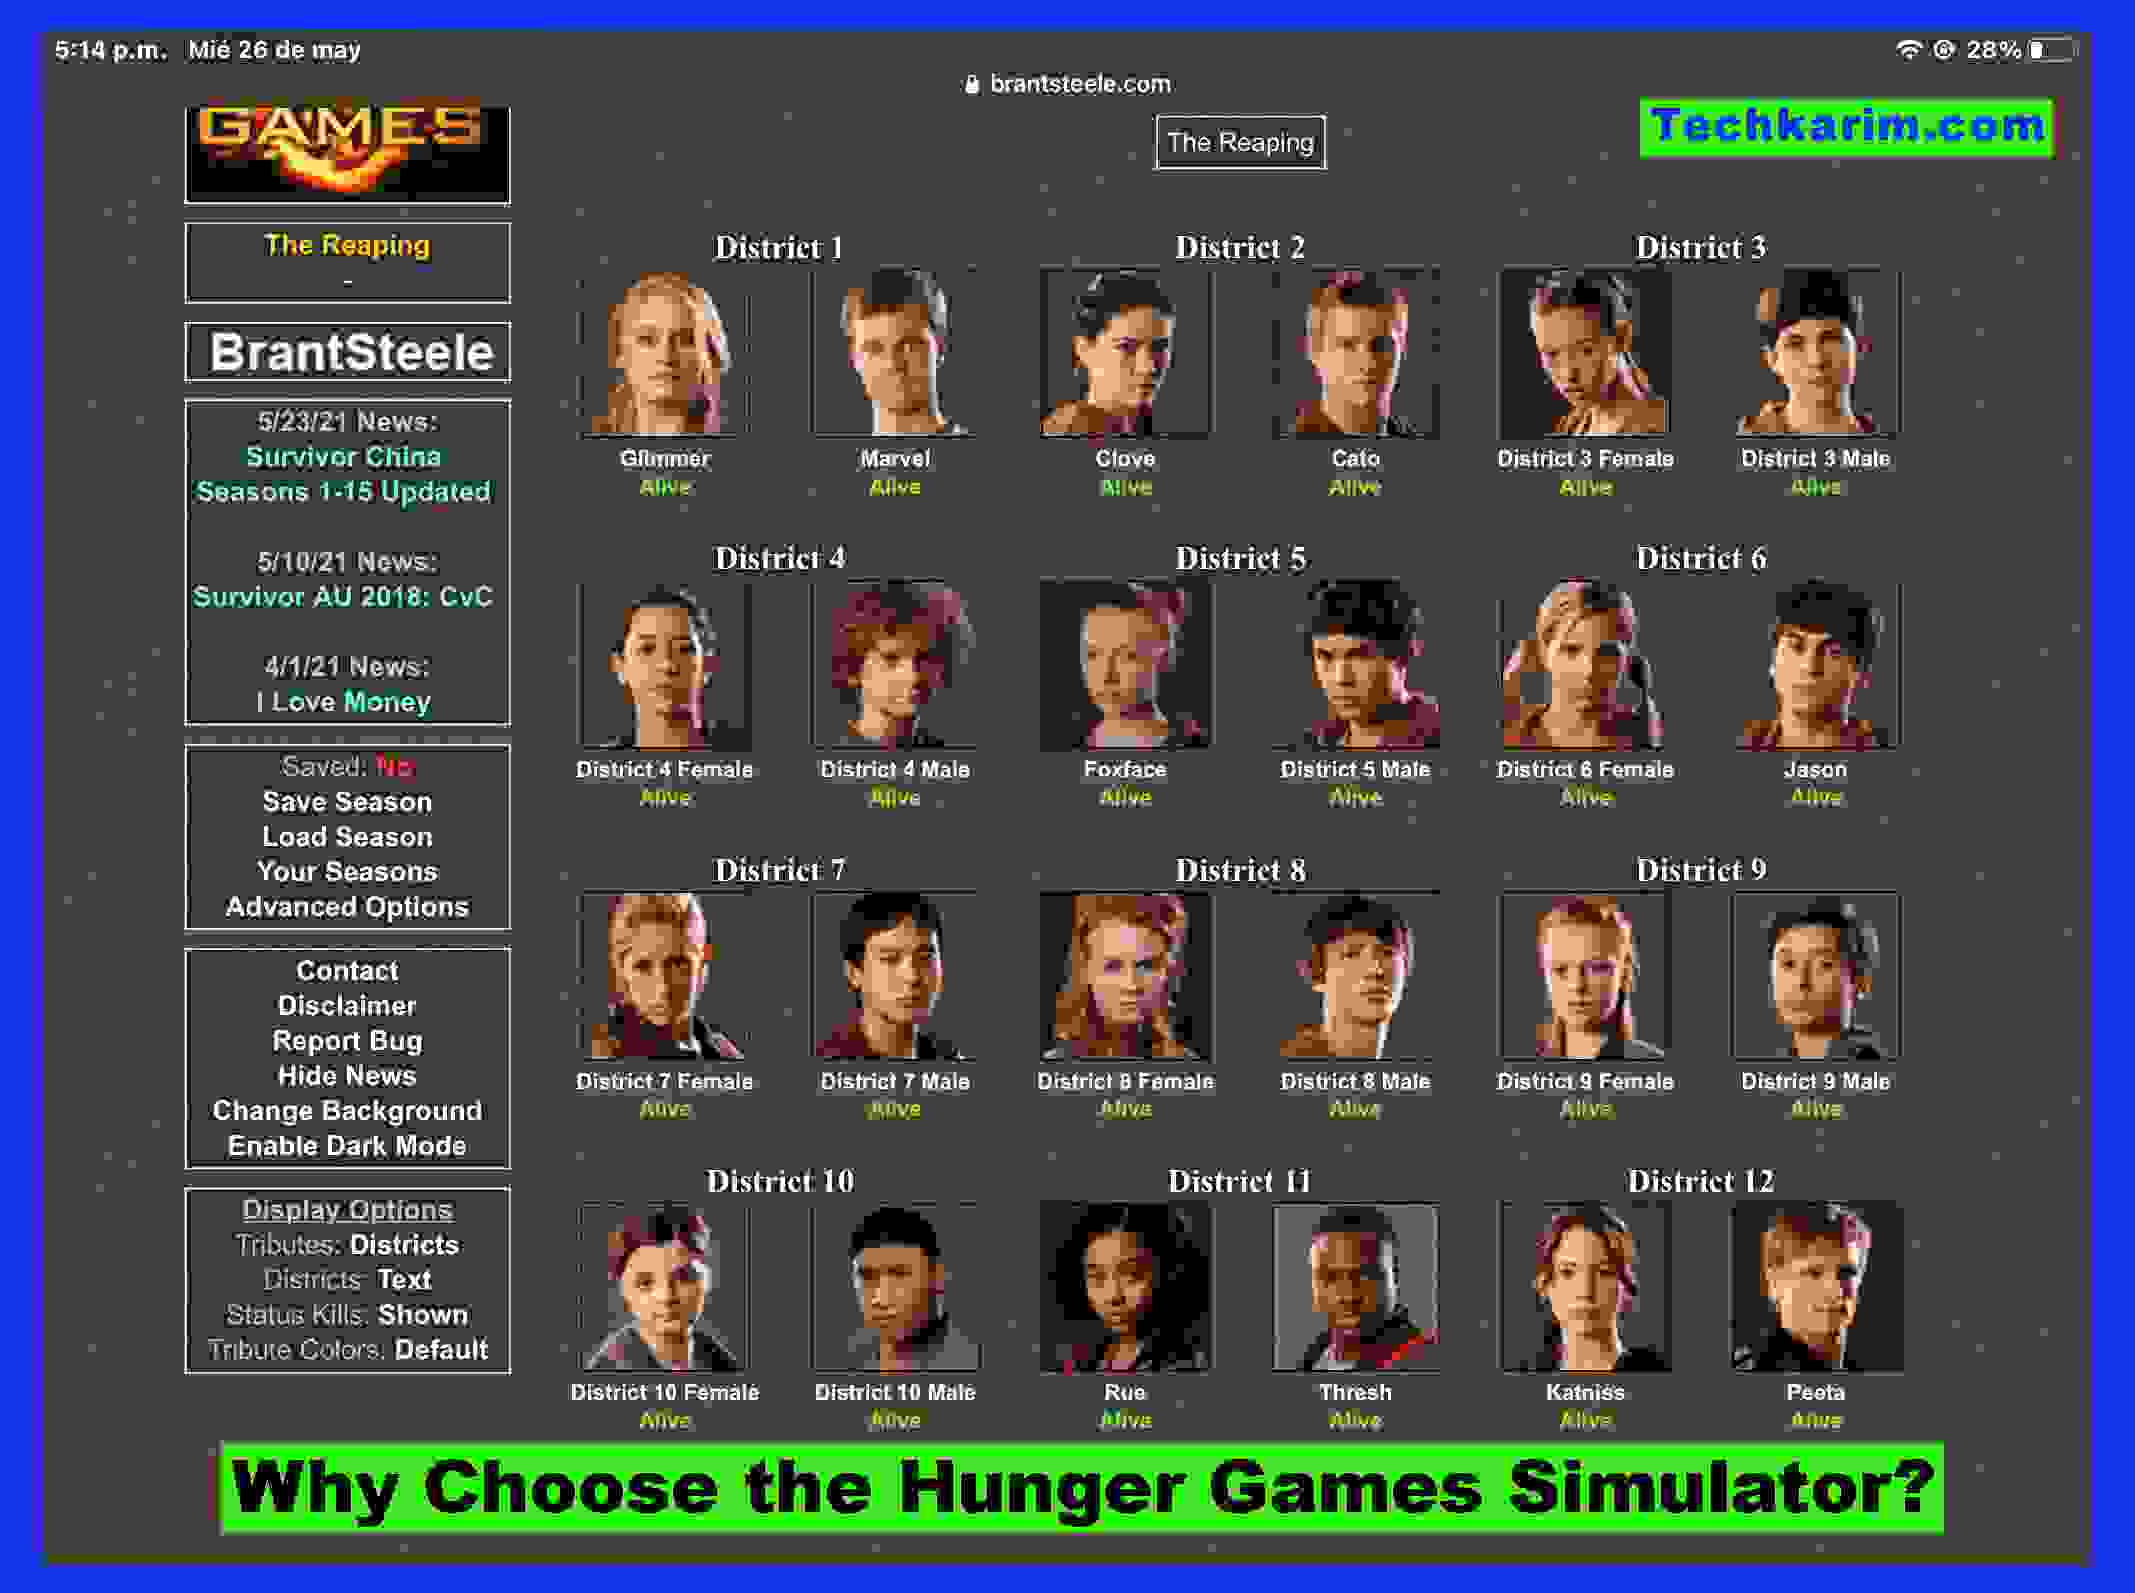 Why Choose the Hunger Games Simulator